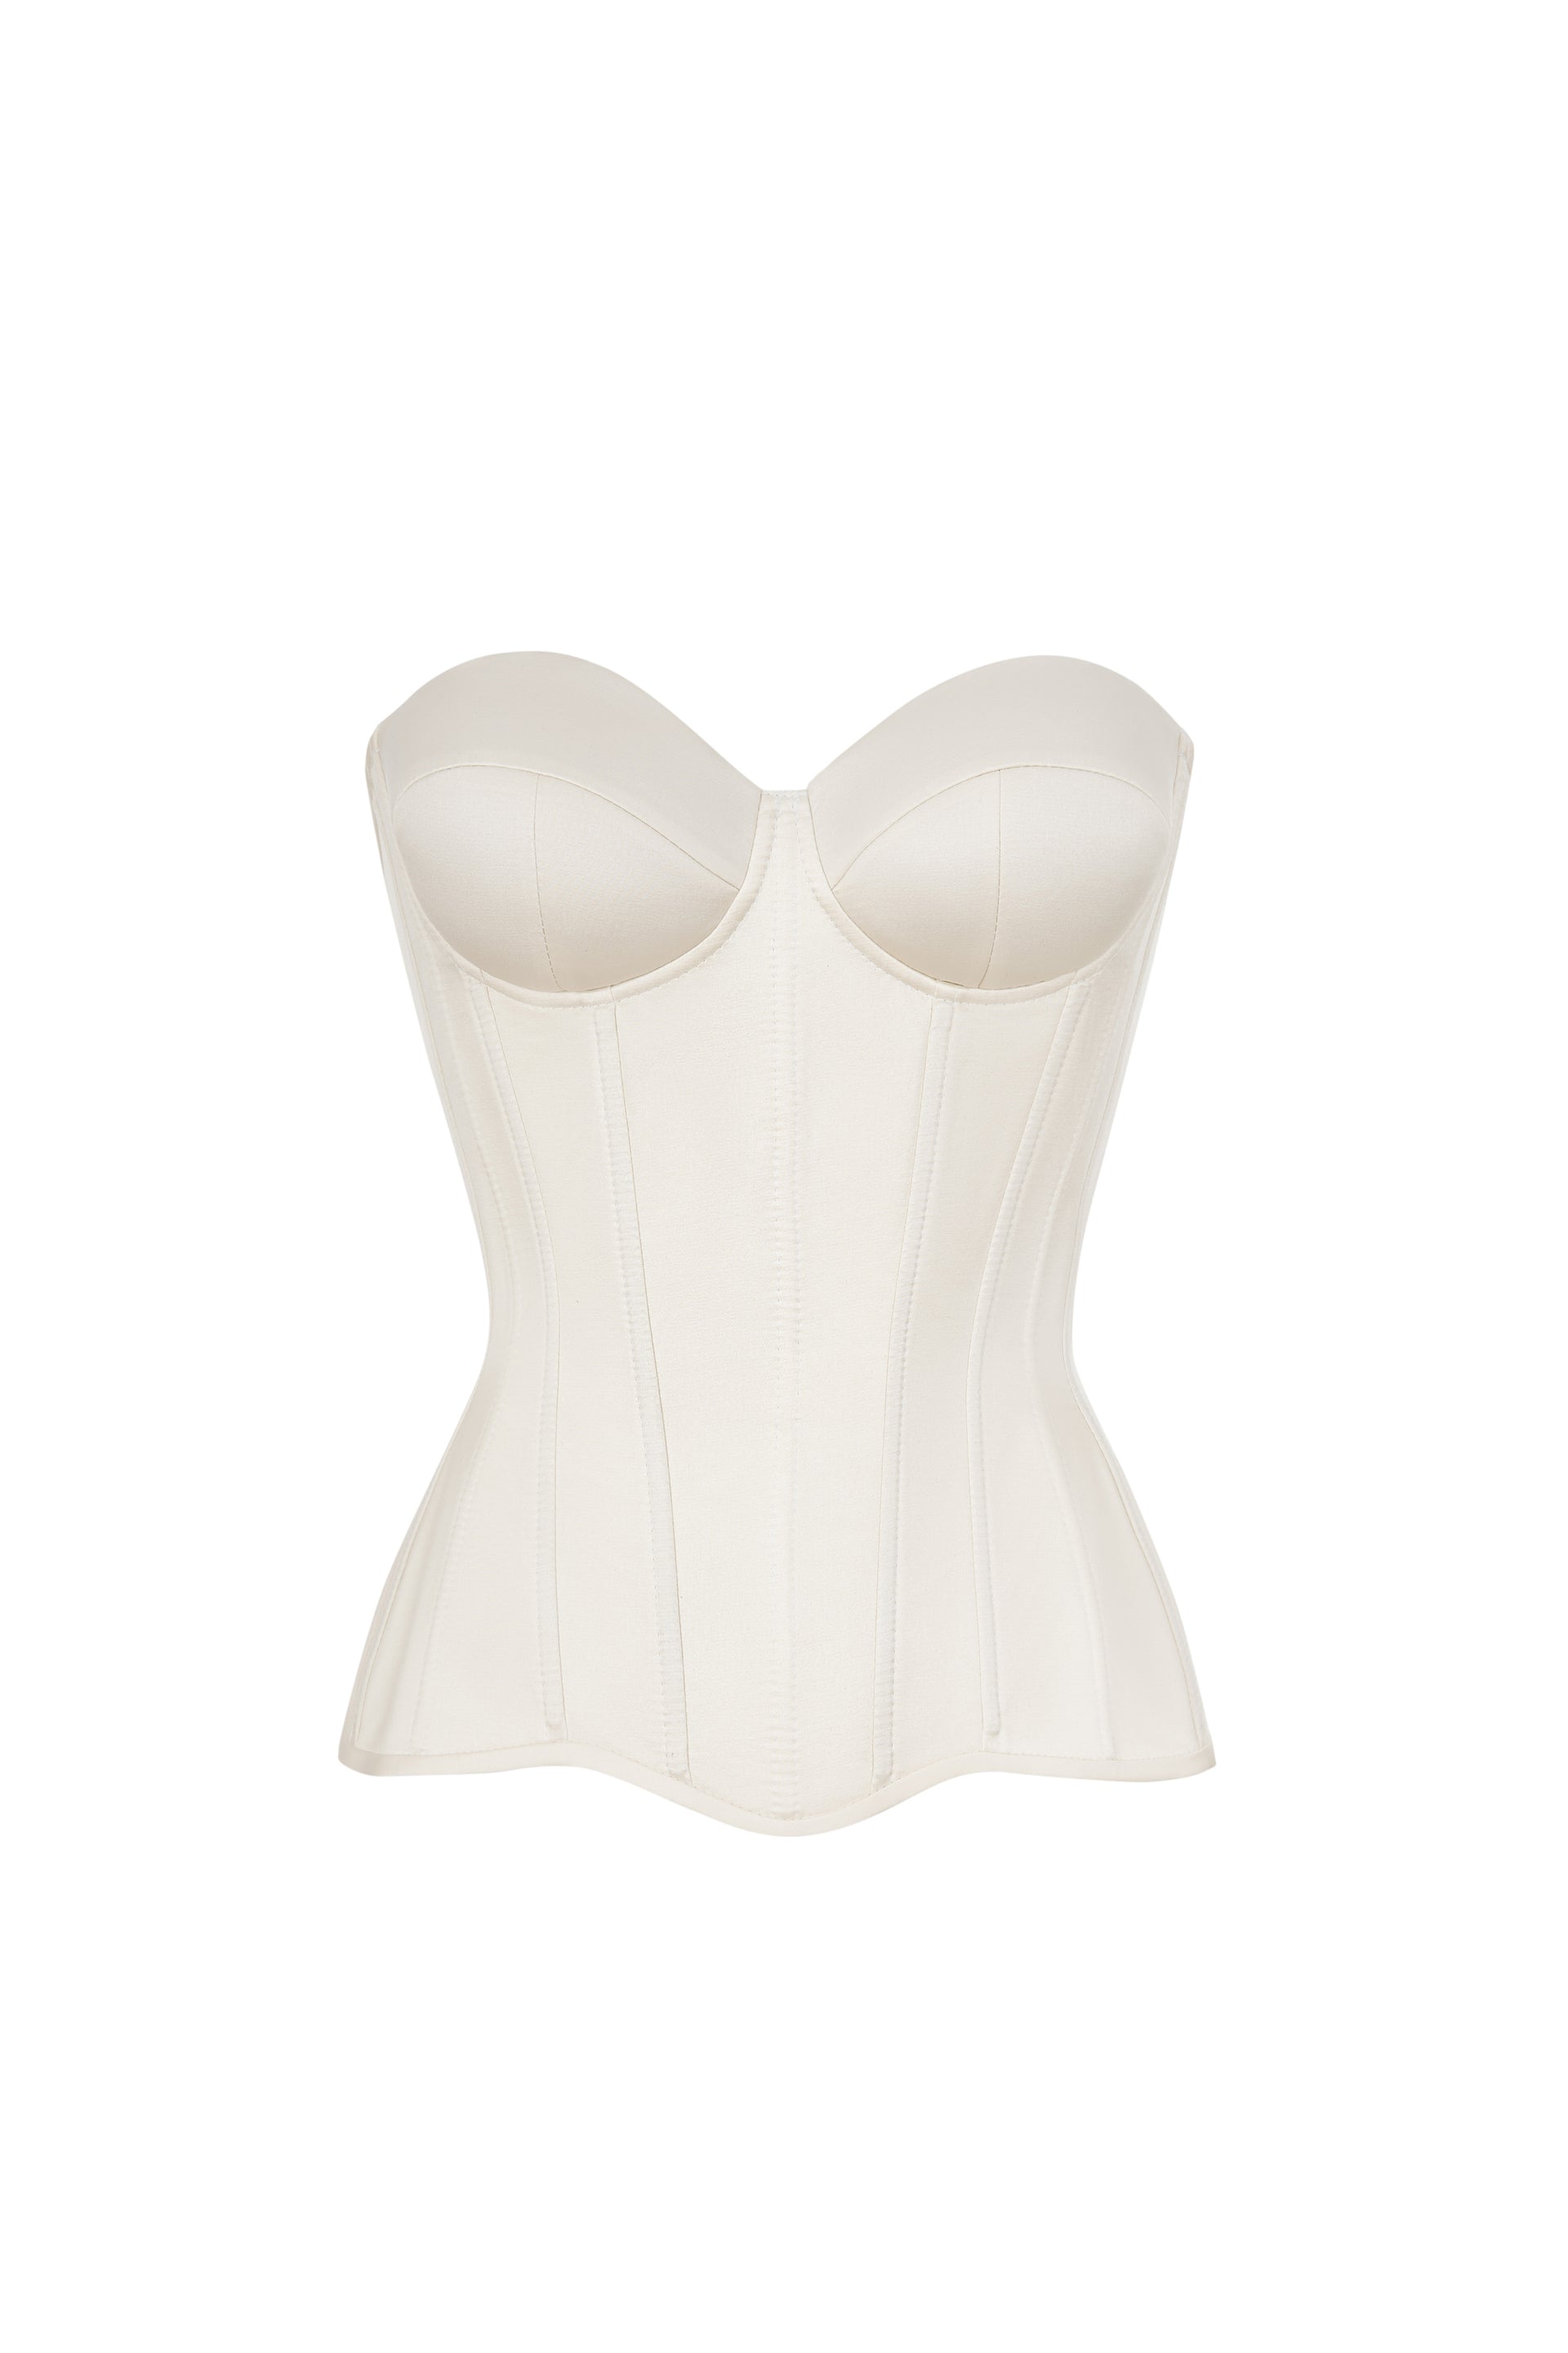 Ivory satin corset with cups